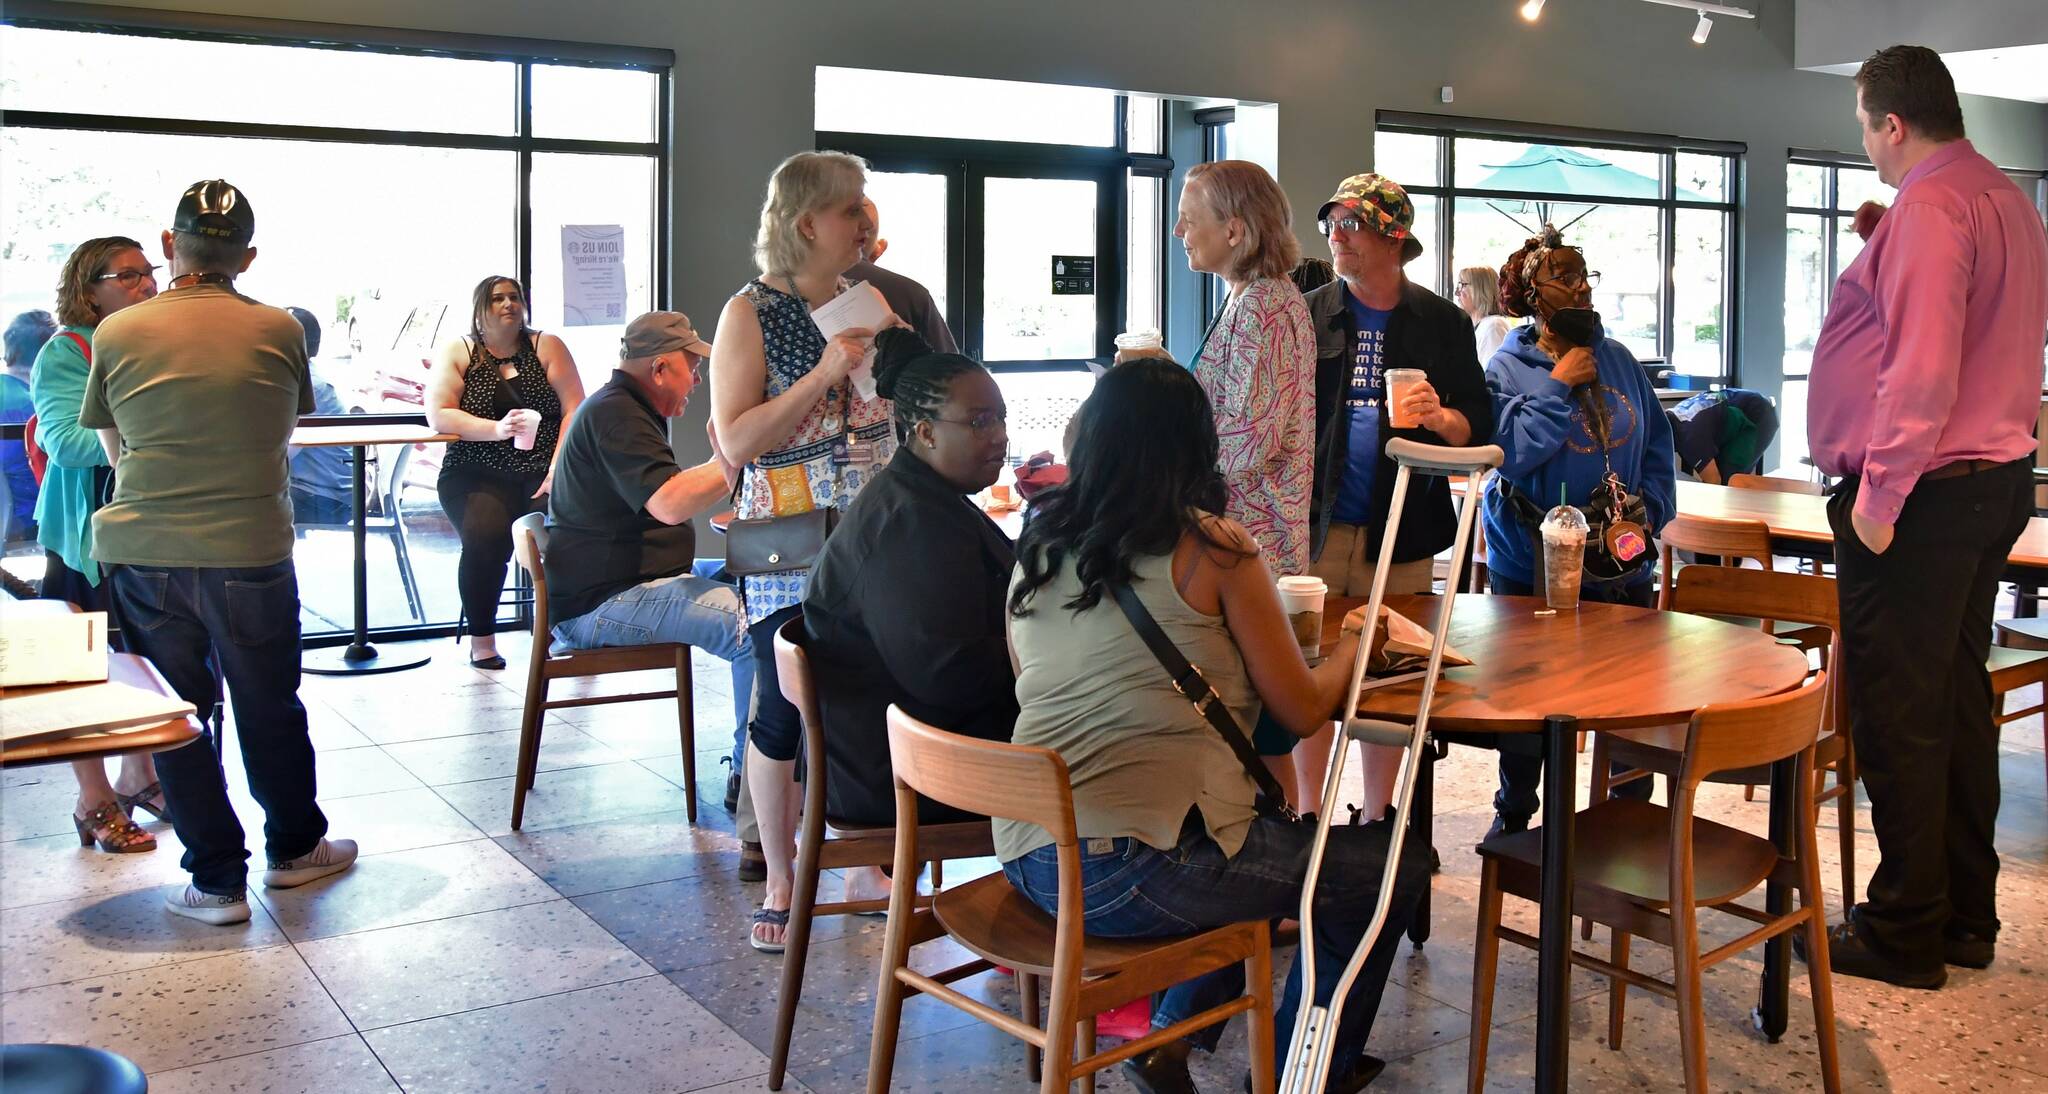 Federal Way city council members and school board directors met with local residents for coffee and a conversation July 15 at the Starbucks at 1301 S. 320th Street in Federal Way. Photos by Bruce Honda.